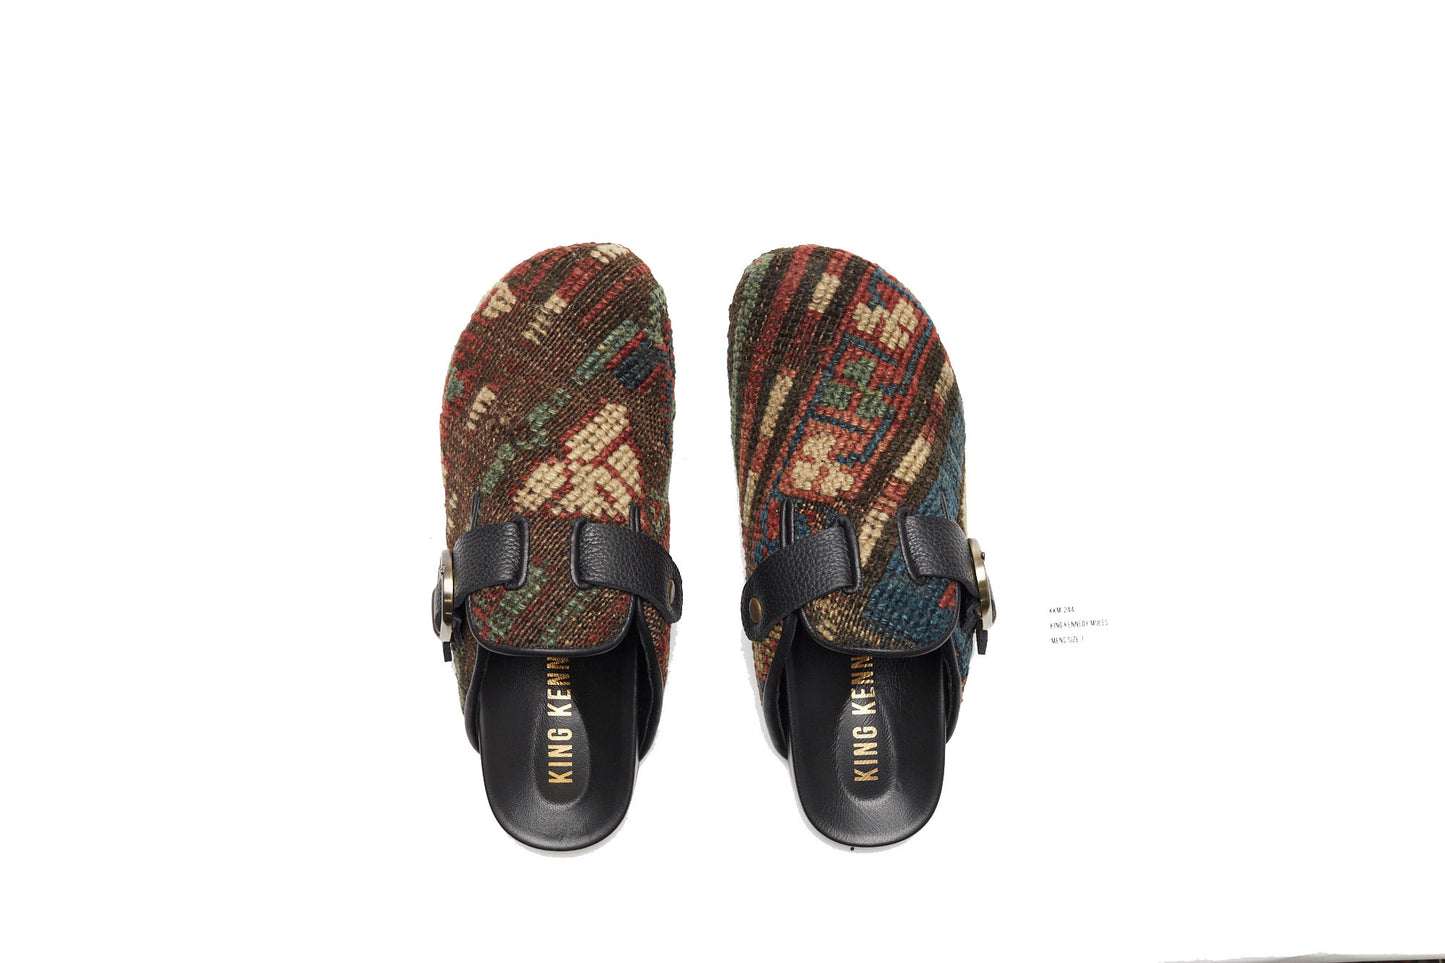 King Kennedy Rug Mules are one-of-a-kind and made of 100 year old antique Persian rug fragments with soft lambskin footbed and rubber sole. This pair is made of an antique Persian rug with patterns in deep earth tones of brown, green, cream and blue. Made in Los Angeles.